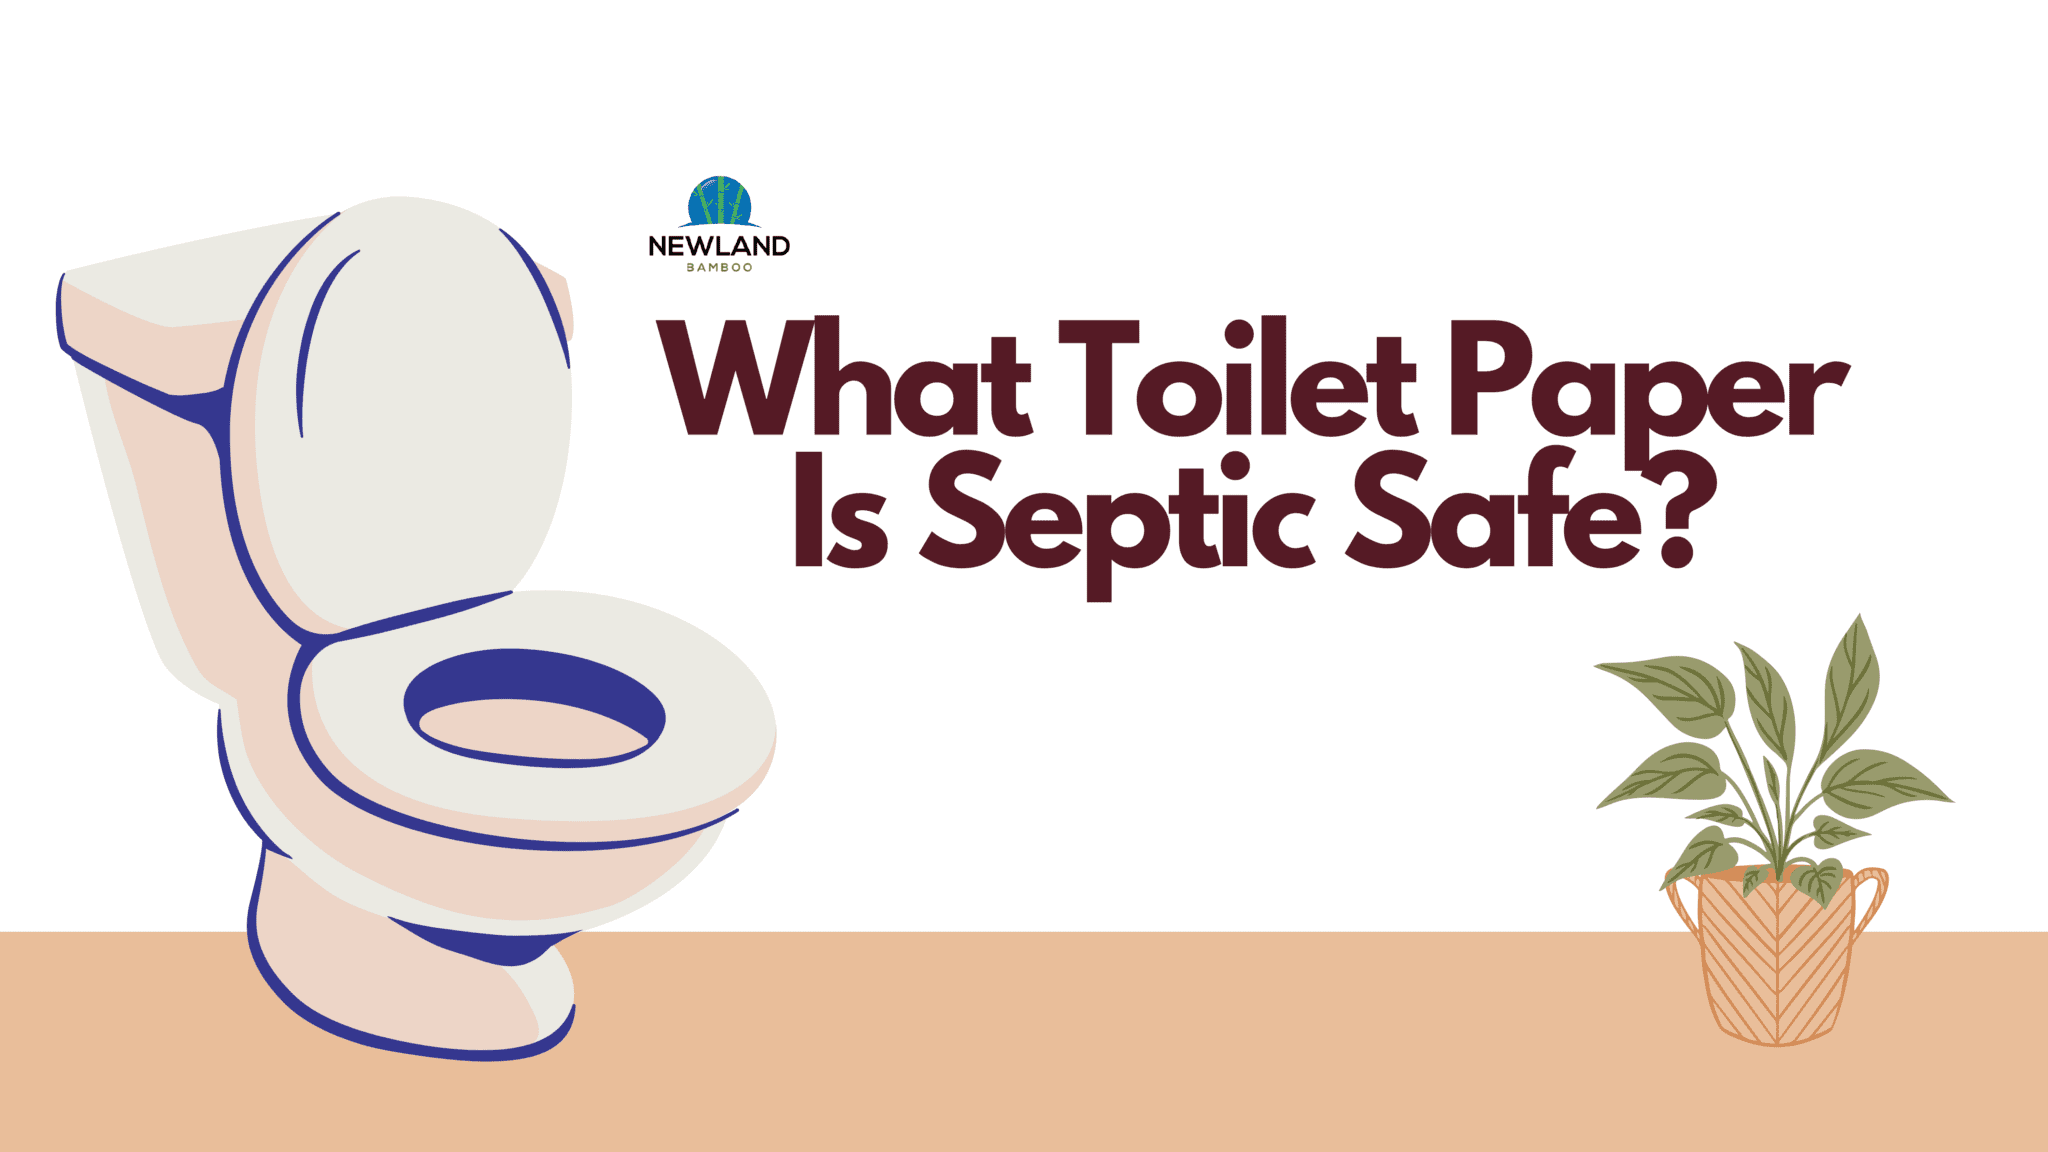 What Toilet Paper Is Septic Safe?